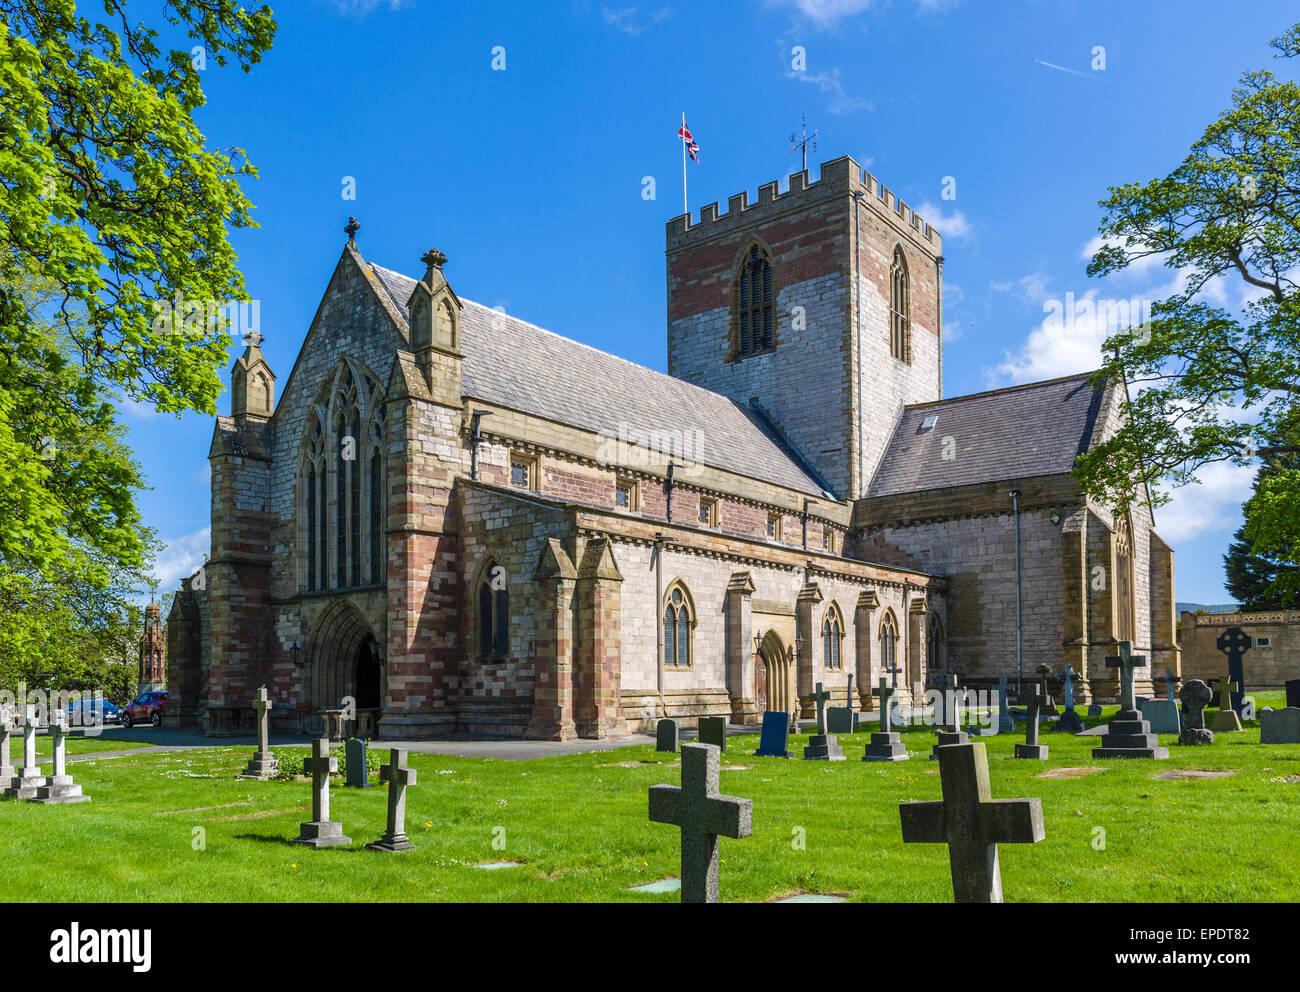 St Asaph Cathedral, purportedly the smallest cathedral in Britain, St Asaph, Denbighshire, Wales, UK Stock Photo